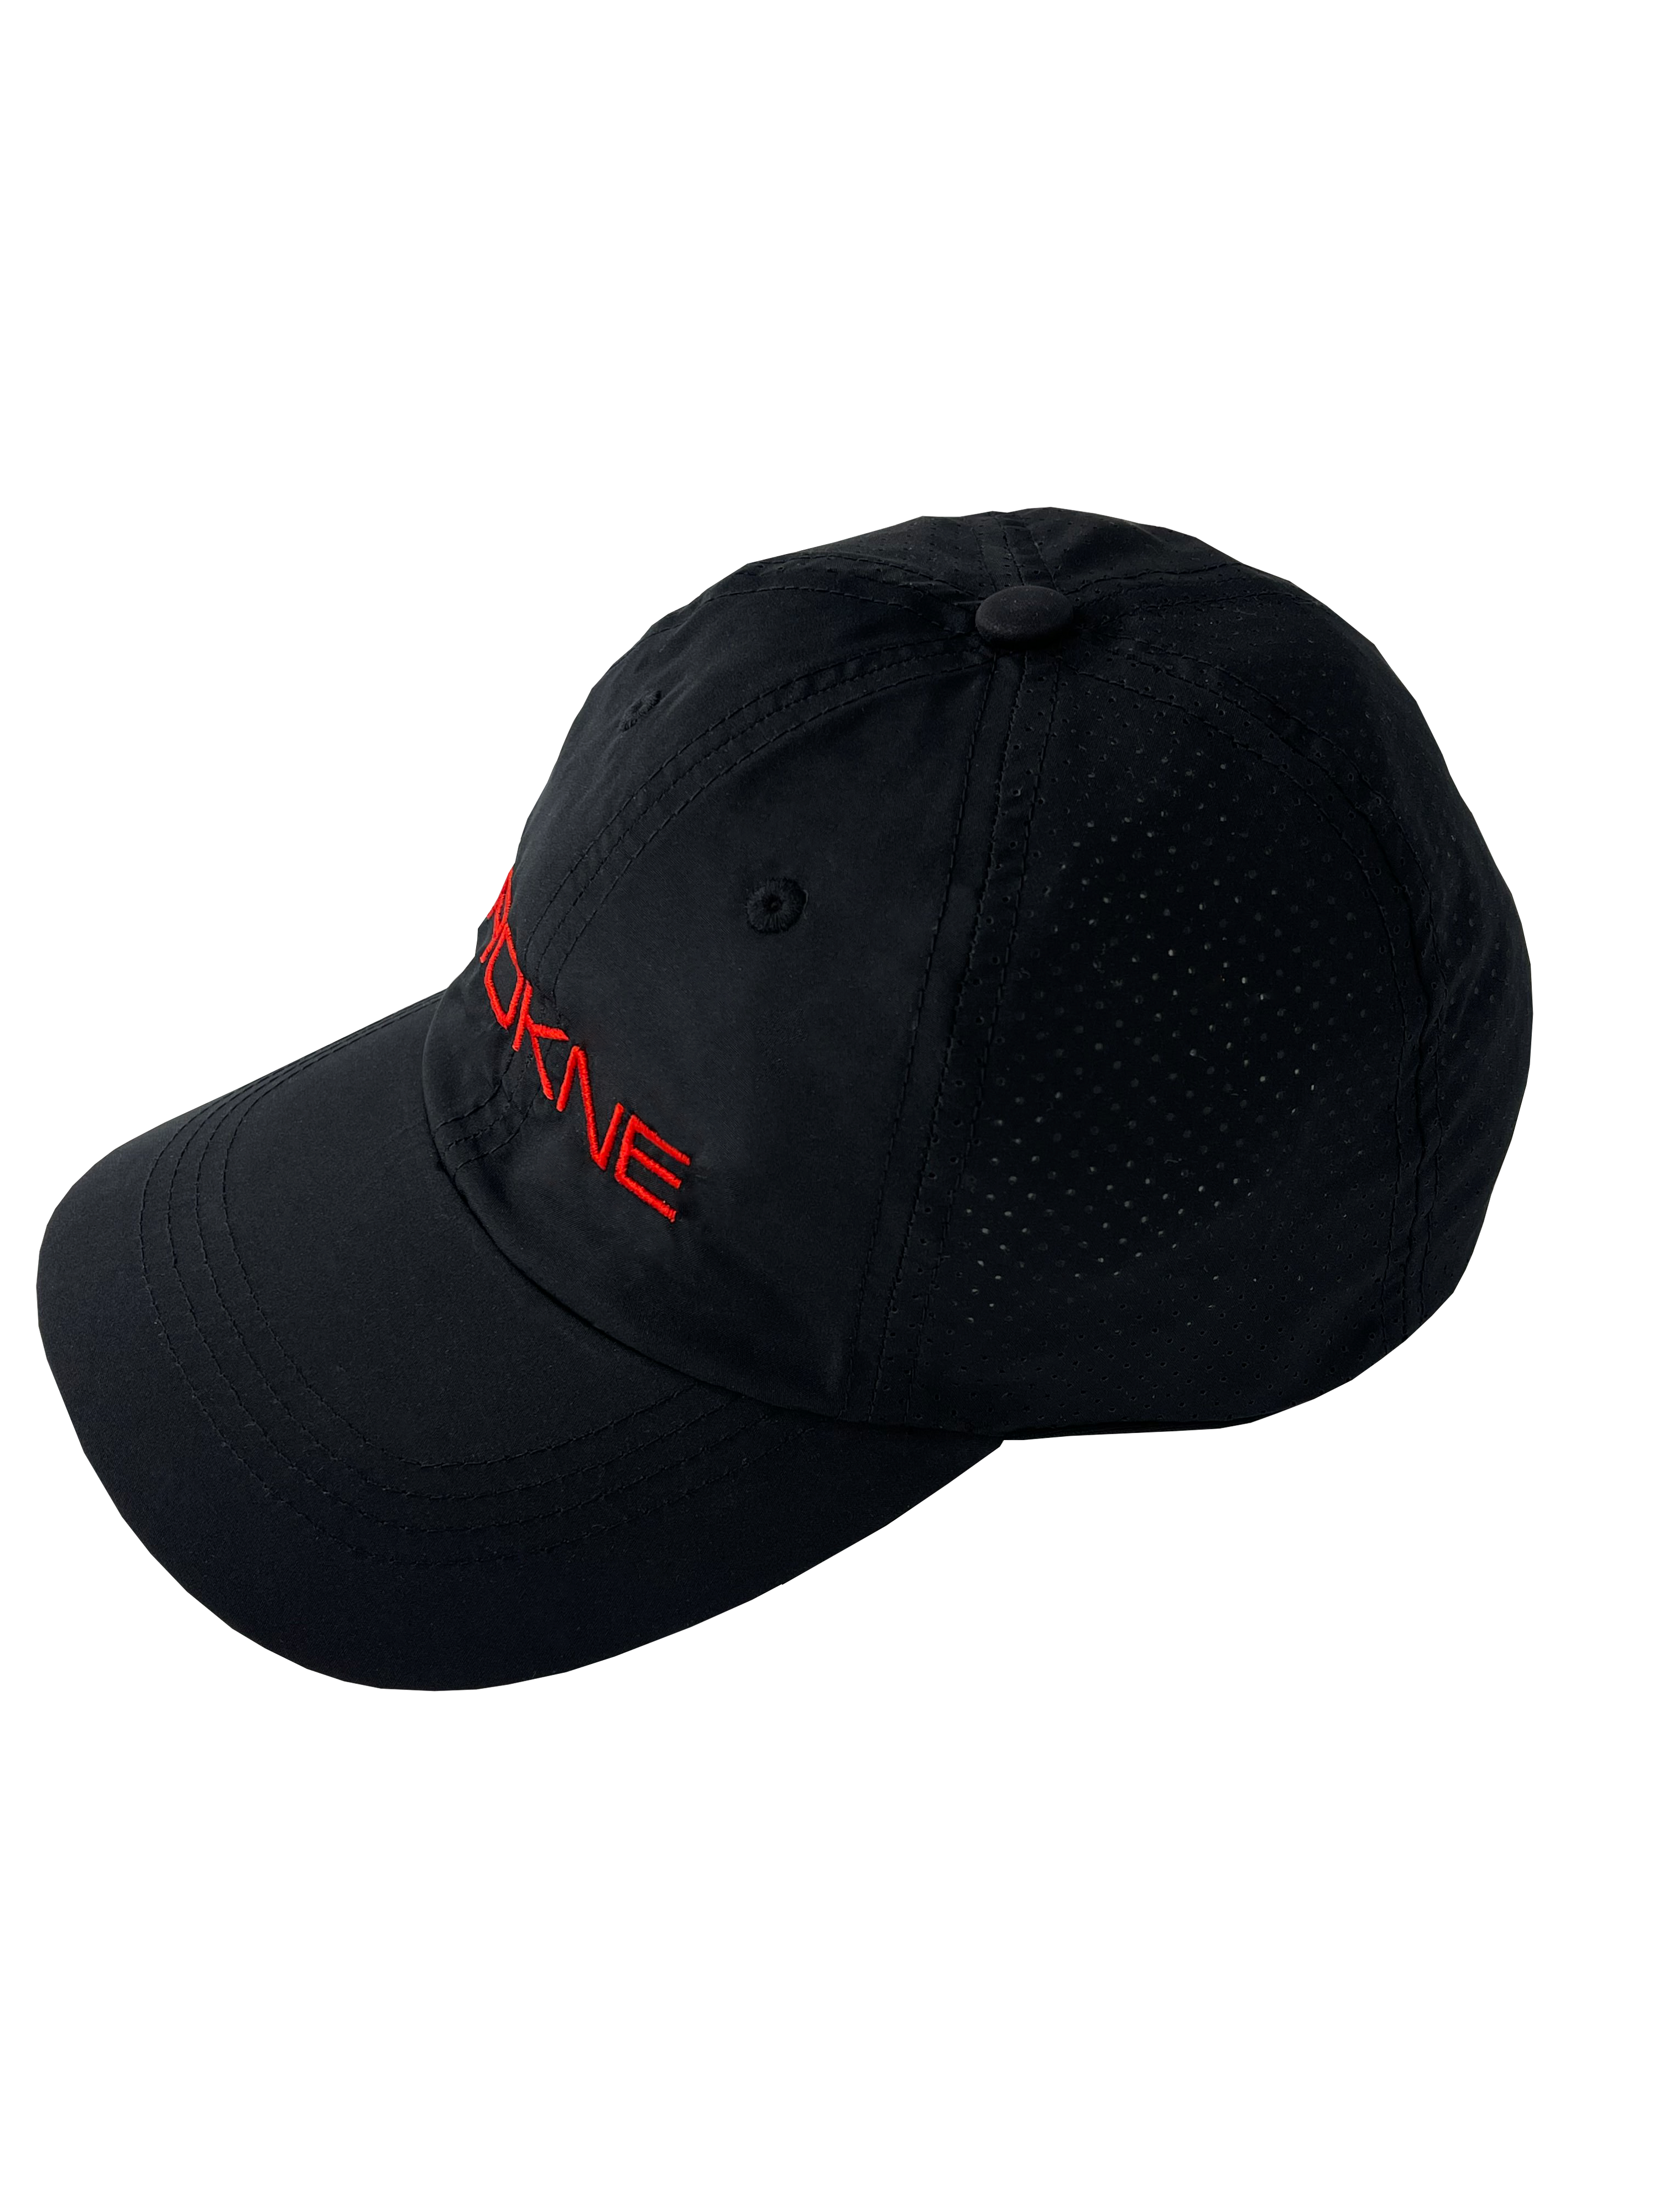 STAY COOL PERFORMANCE HAT